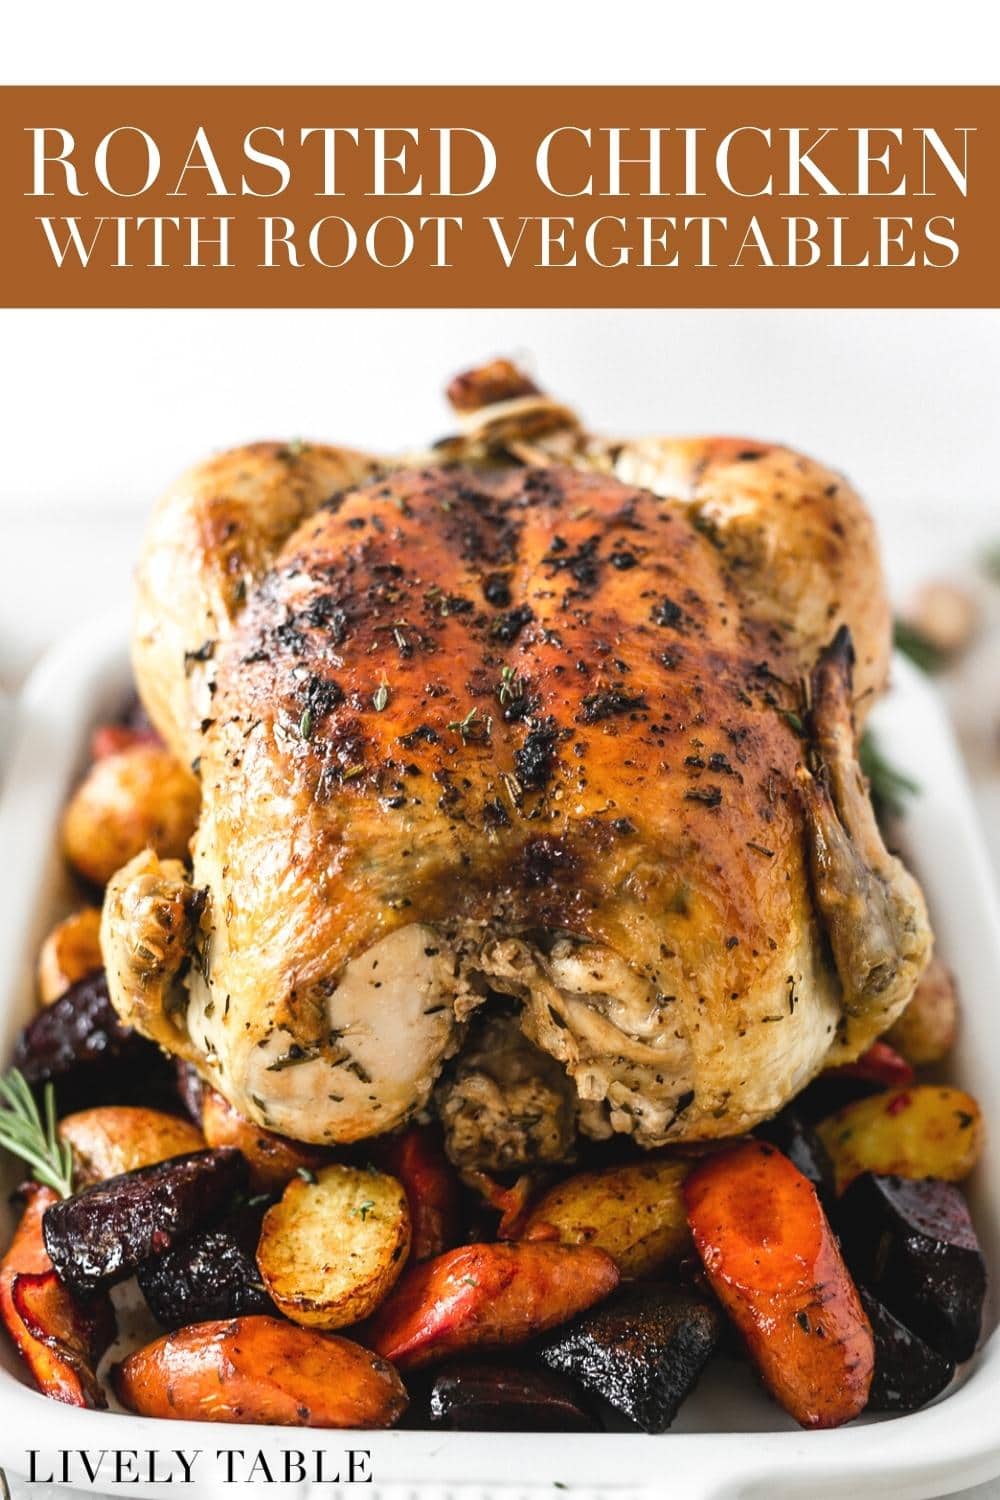 Perfect Roasted Chicken and Root Vegetables - Lively Table